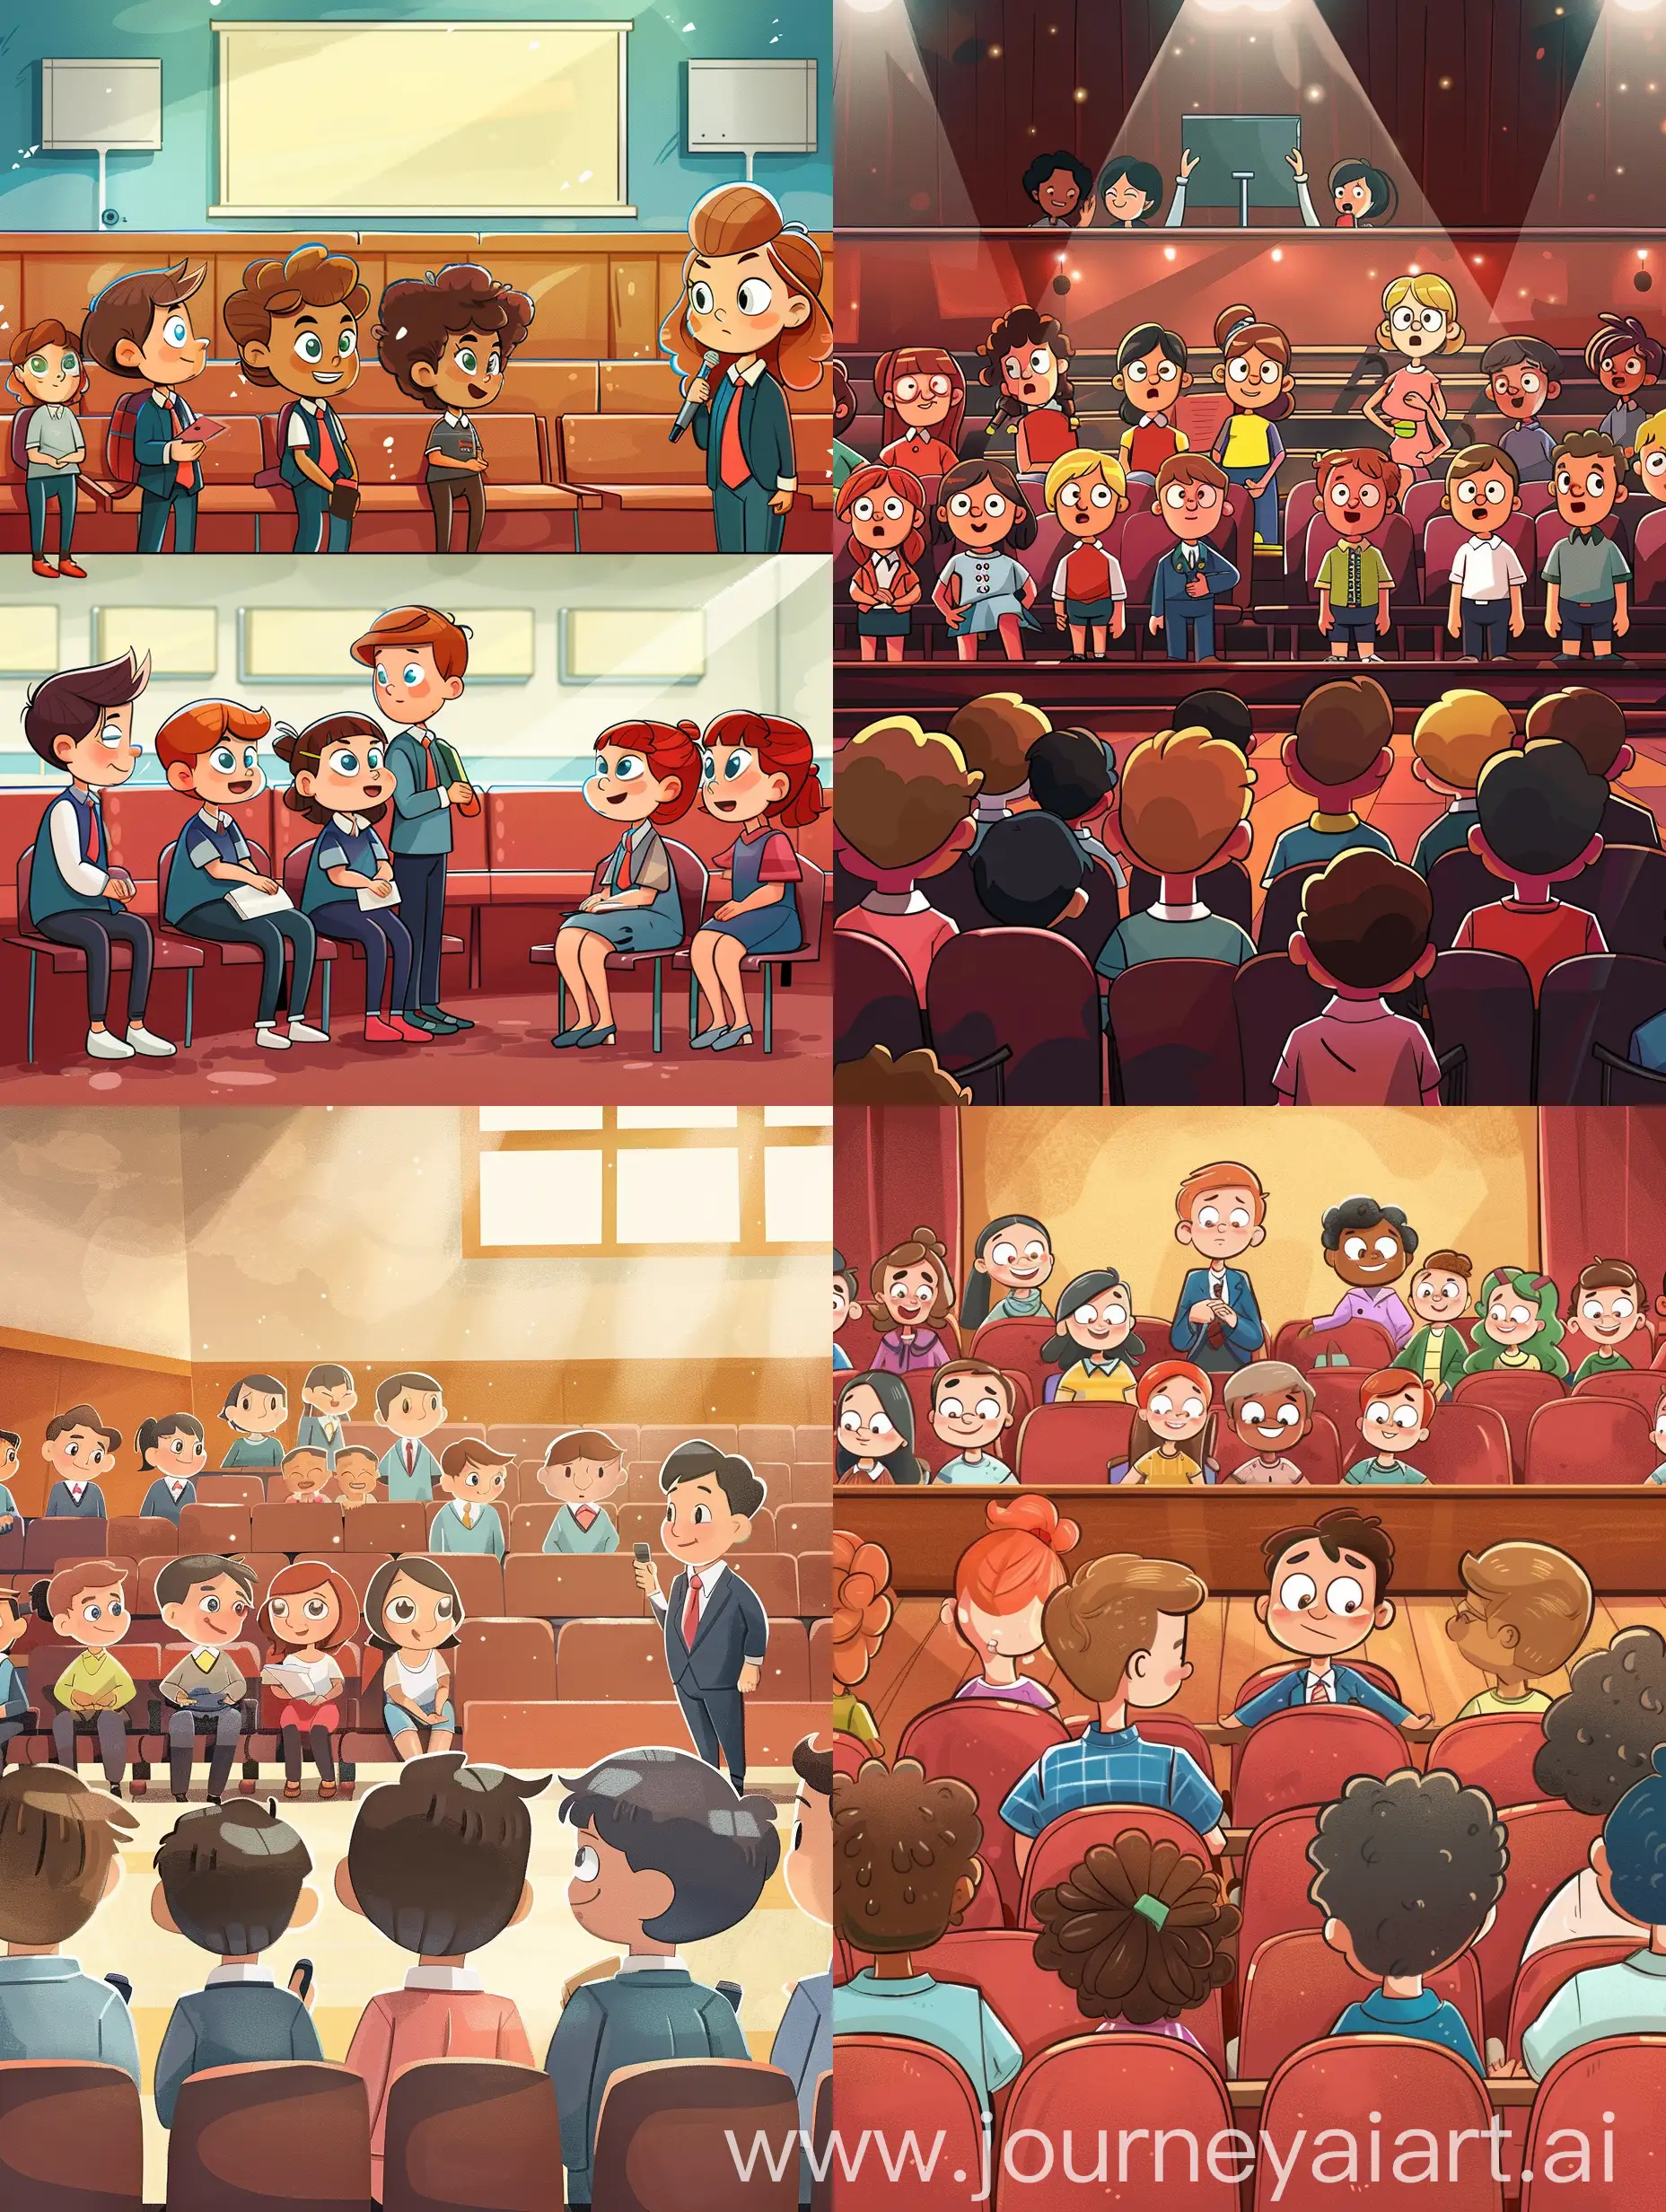 Cartoon style, pixar style, cute, fresh, smile, fun, colorfull, A school assembly with children gathered in the auditorium, listening to a guest speaker.